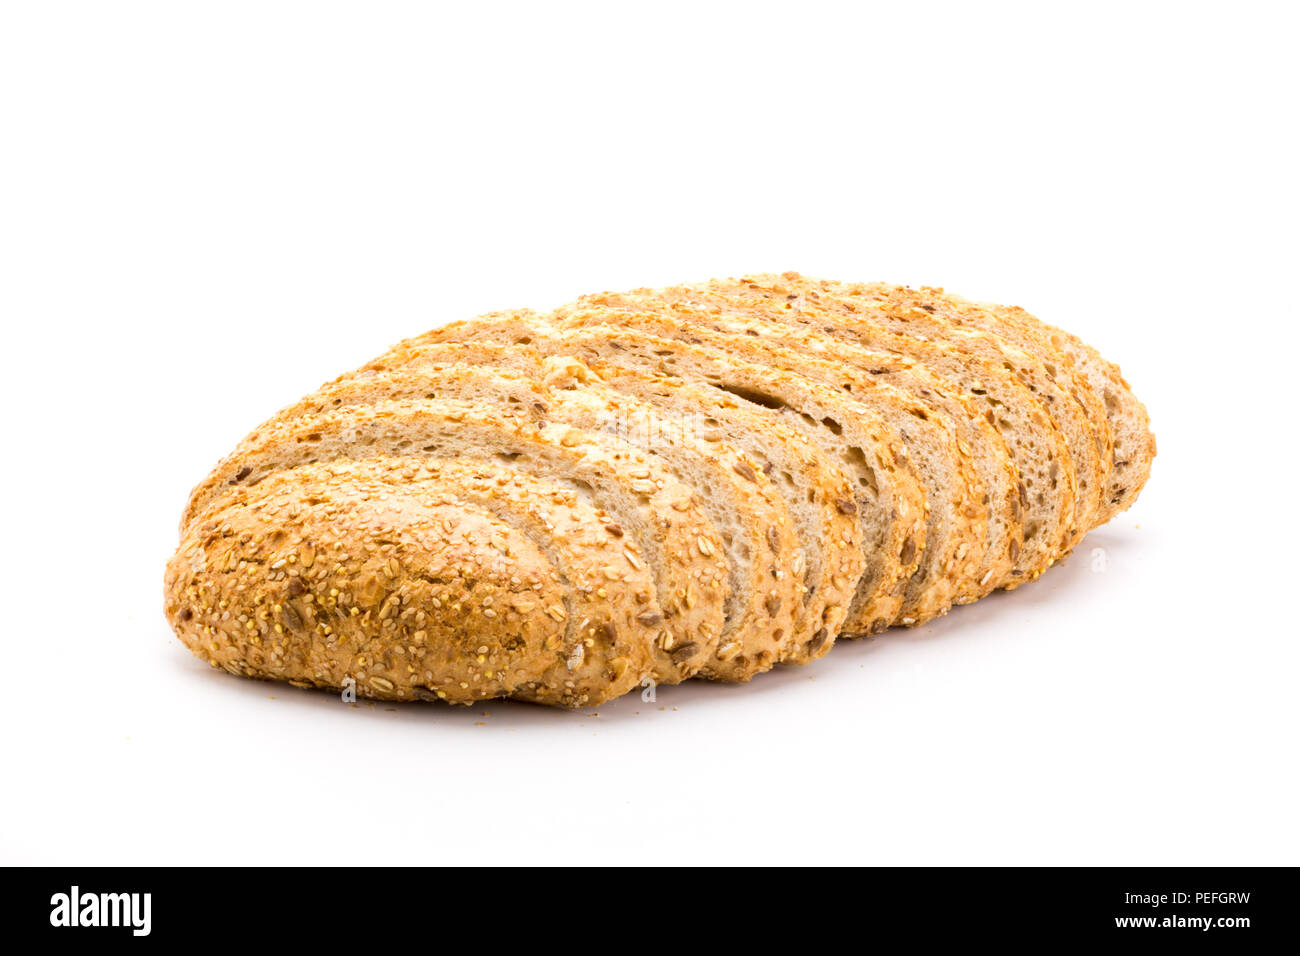 Freshly baked 7 cereals bread, whole grain food with a lot of fiber isolated on a white background Stock Photo